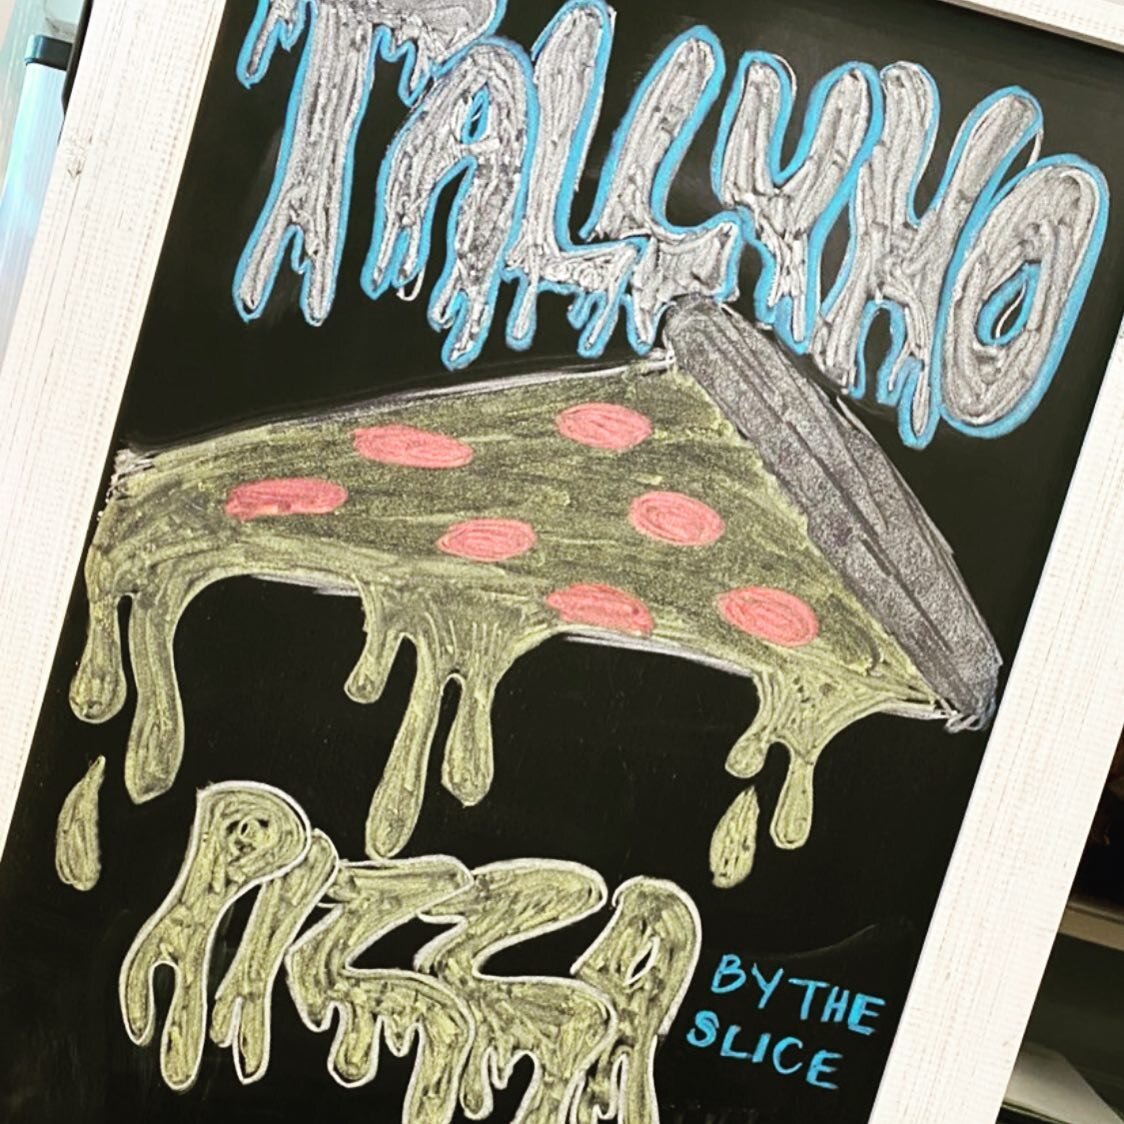 🍕 🤤 Come get some! 🔥 🎙 #tallyhopizza #tallyho #downtown #leesburg #pizza #livemusic